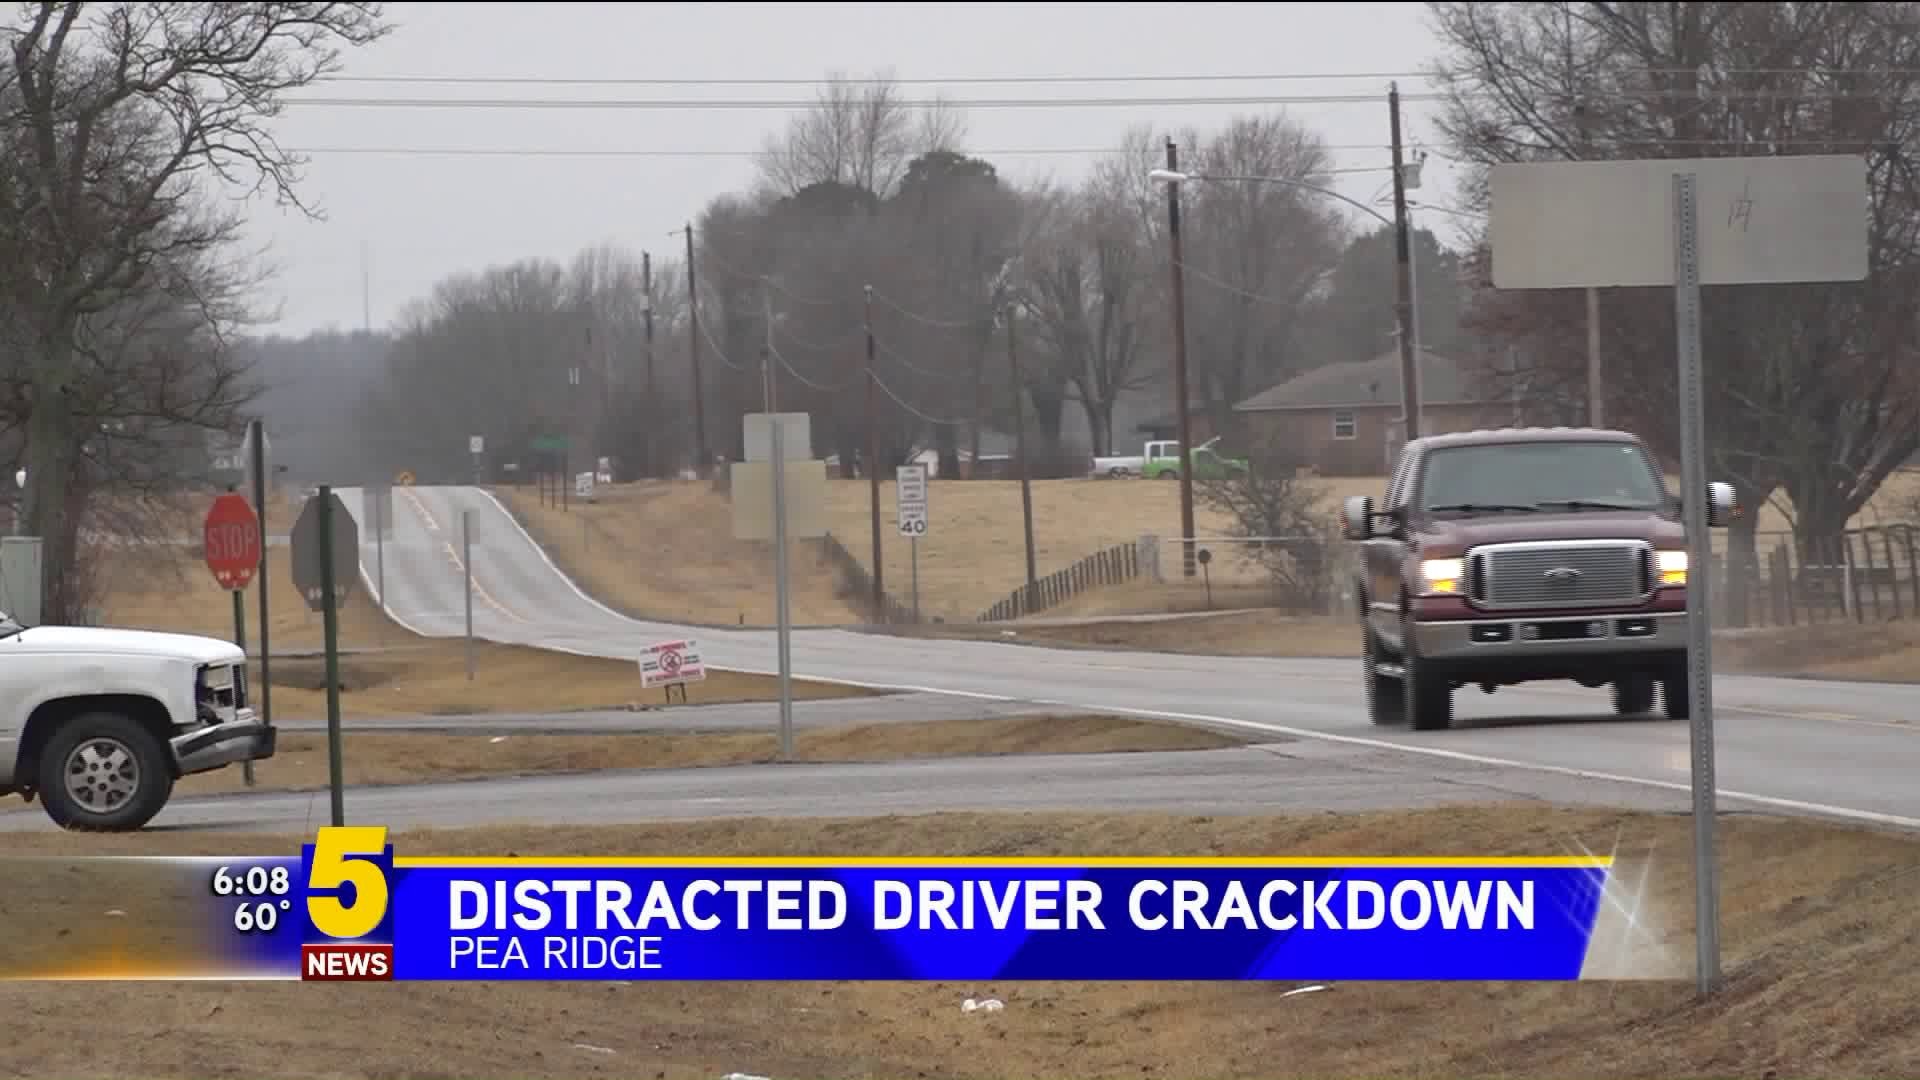 Distracted Driver Crackdown